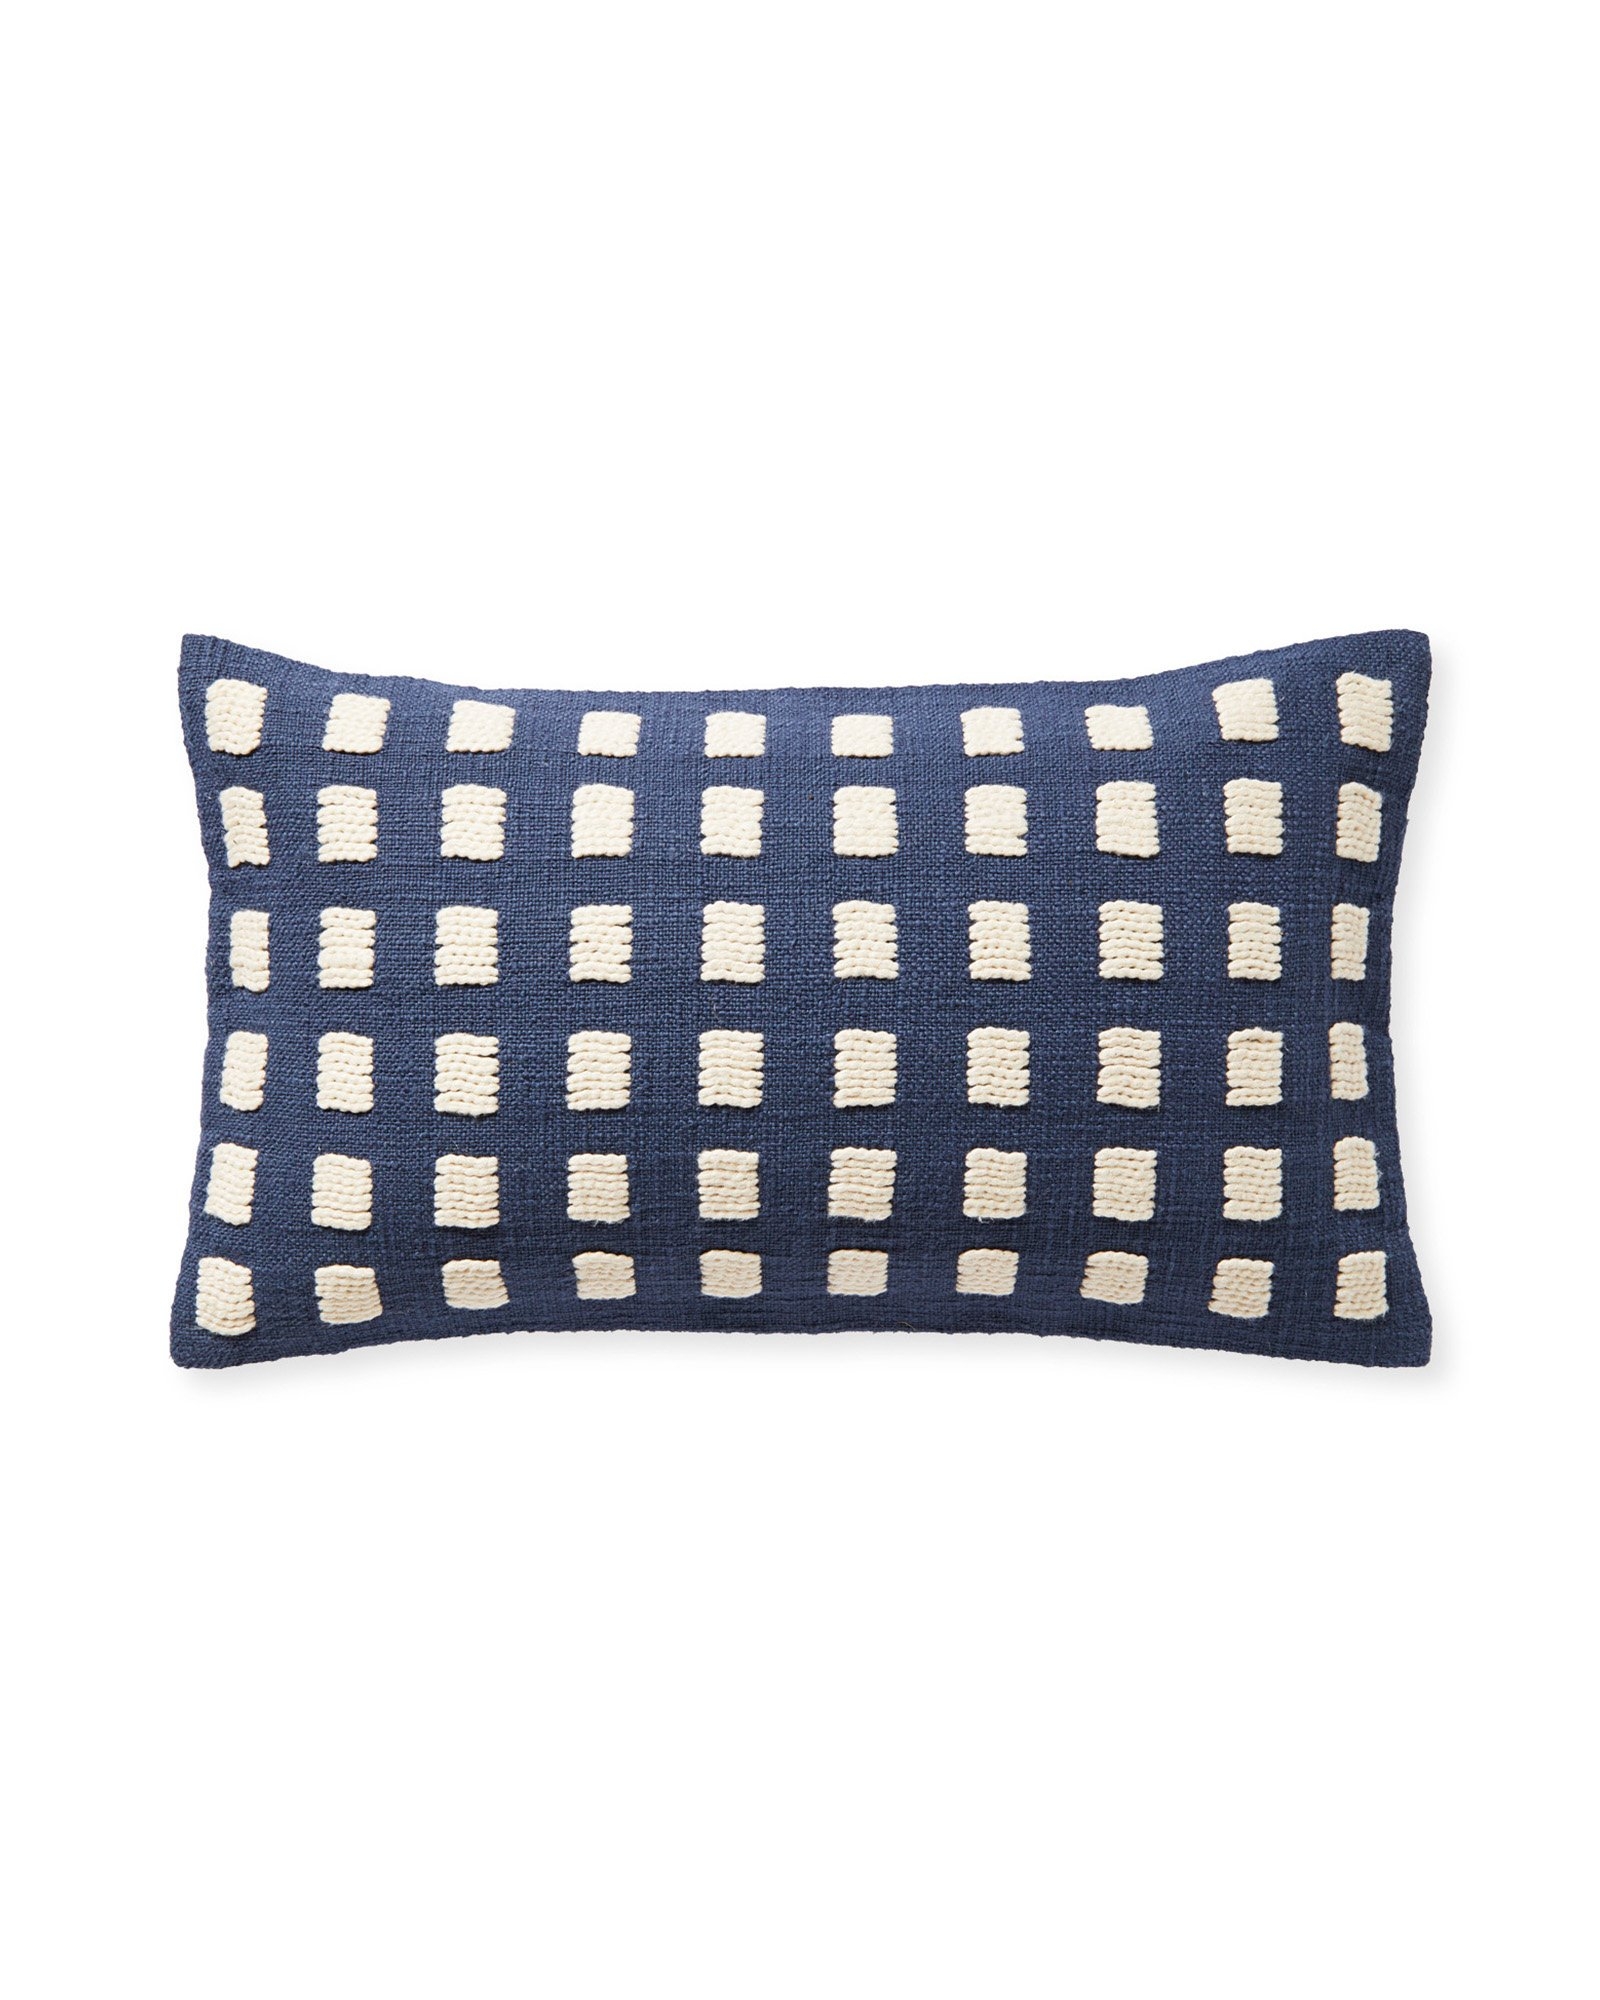 Pebble Cove Pillow Cover - Image 0